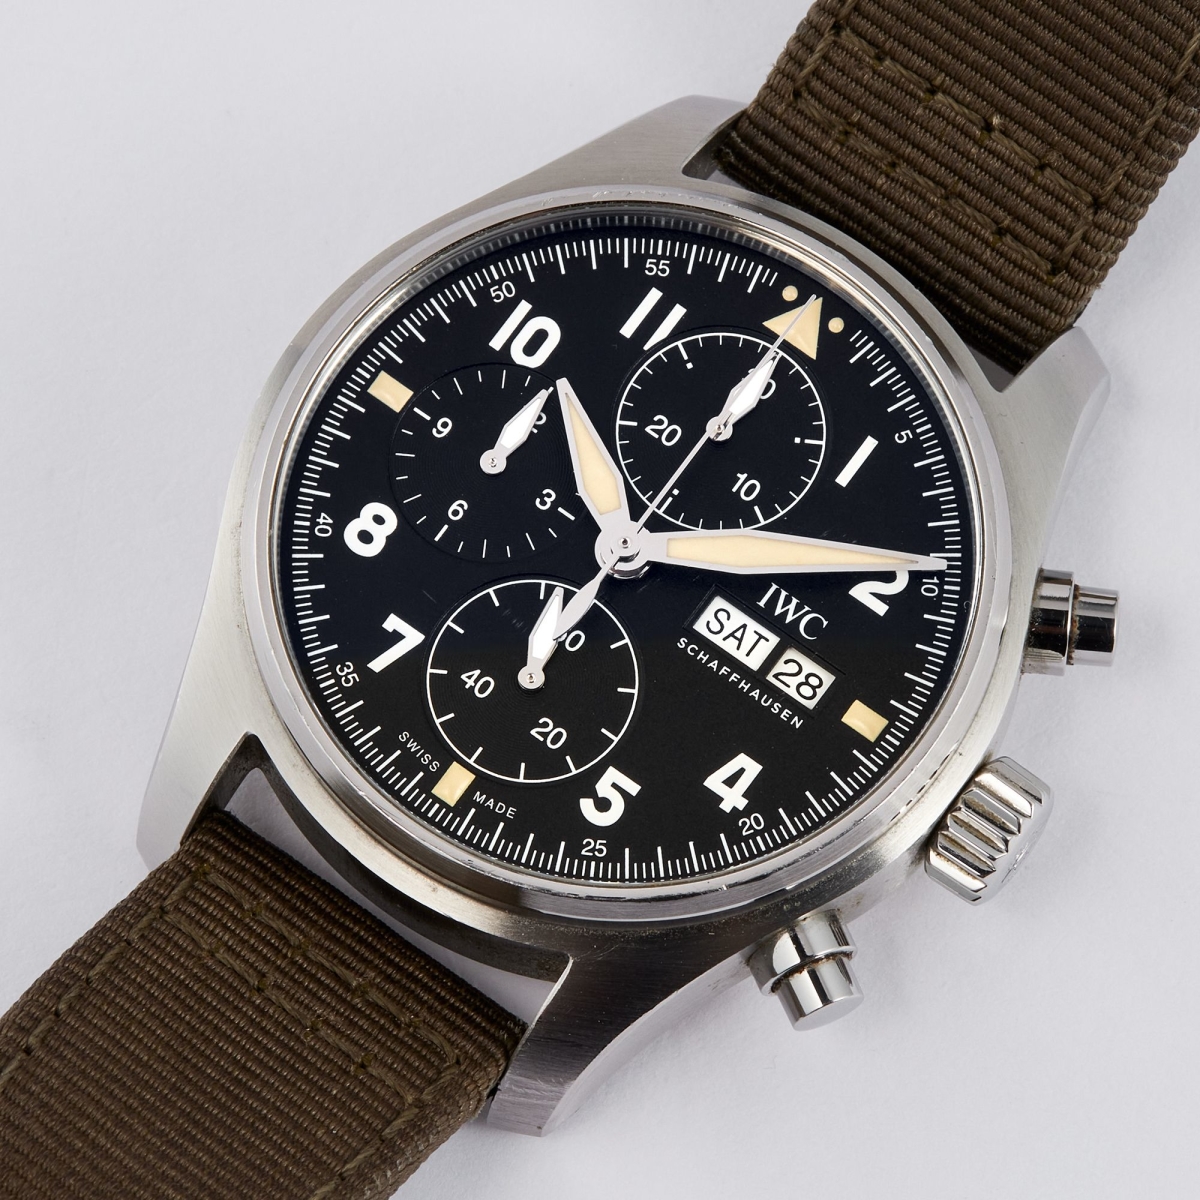 Pilot's Watch Chronograph Spitfire 41 Stainless Steel Black Dial